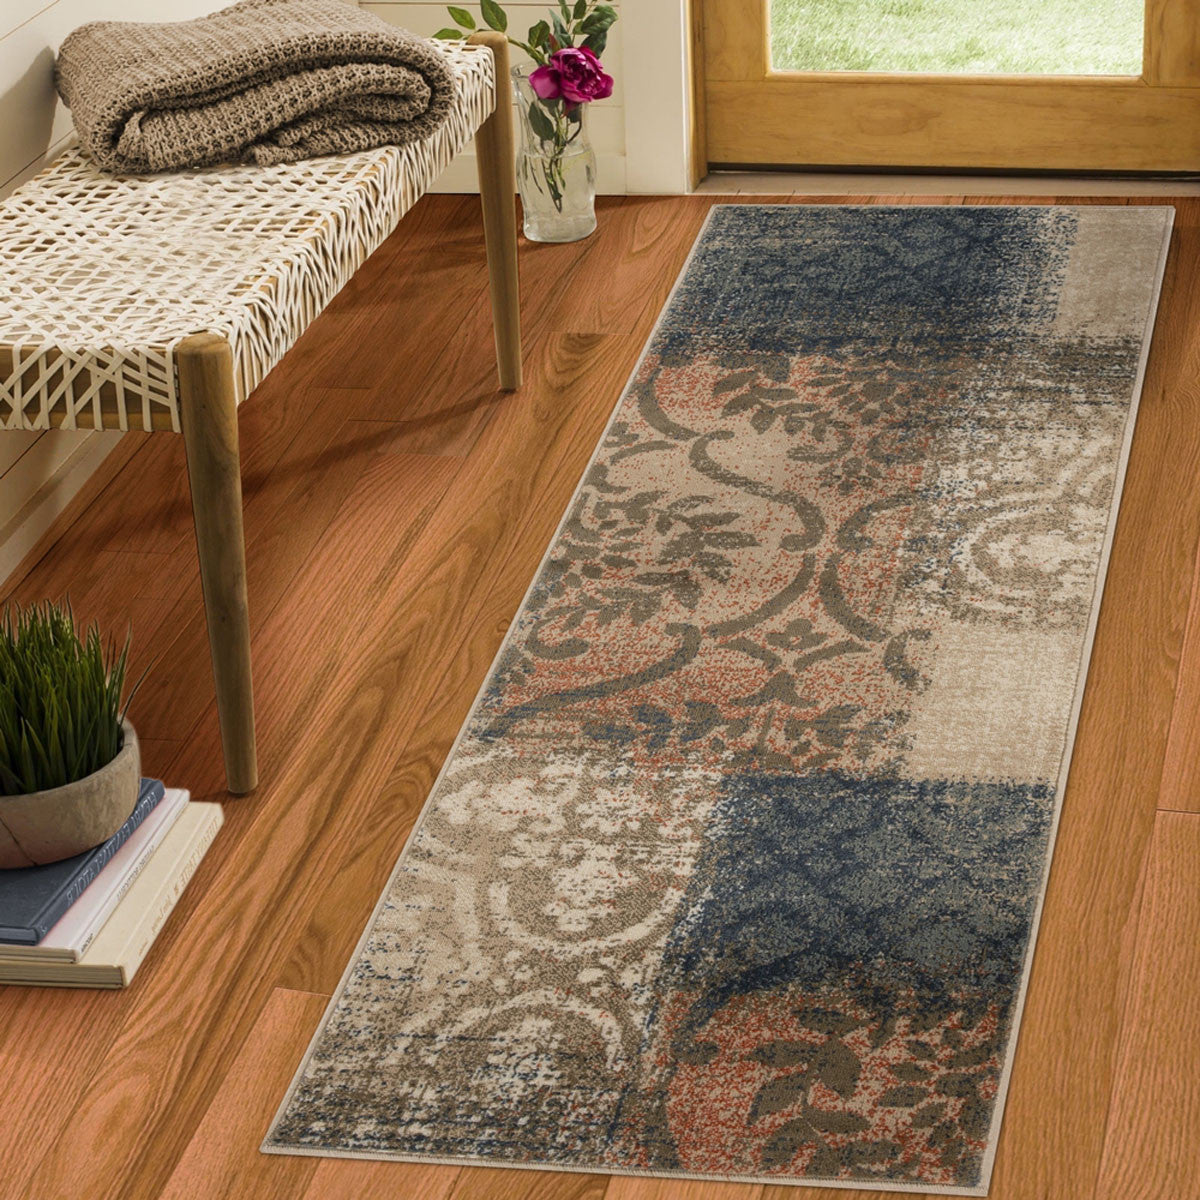 8' Navy And Salmon Damask Distressed Stain Resistant Runner Rug